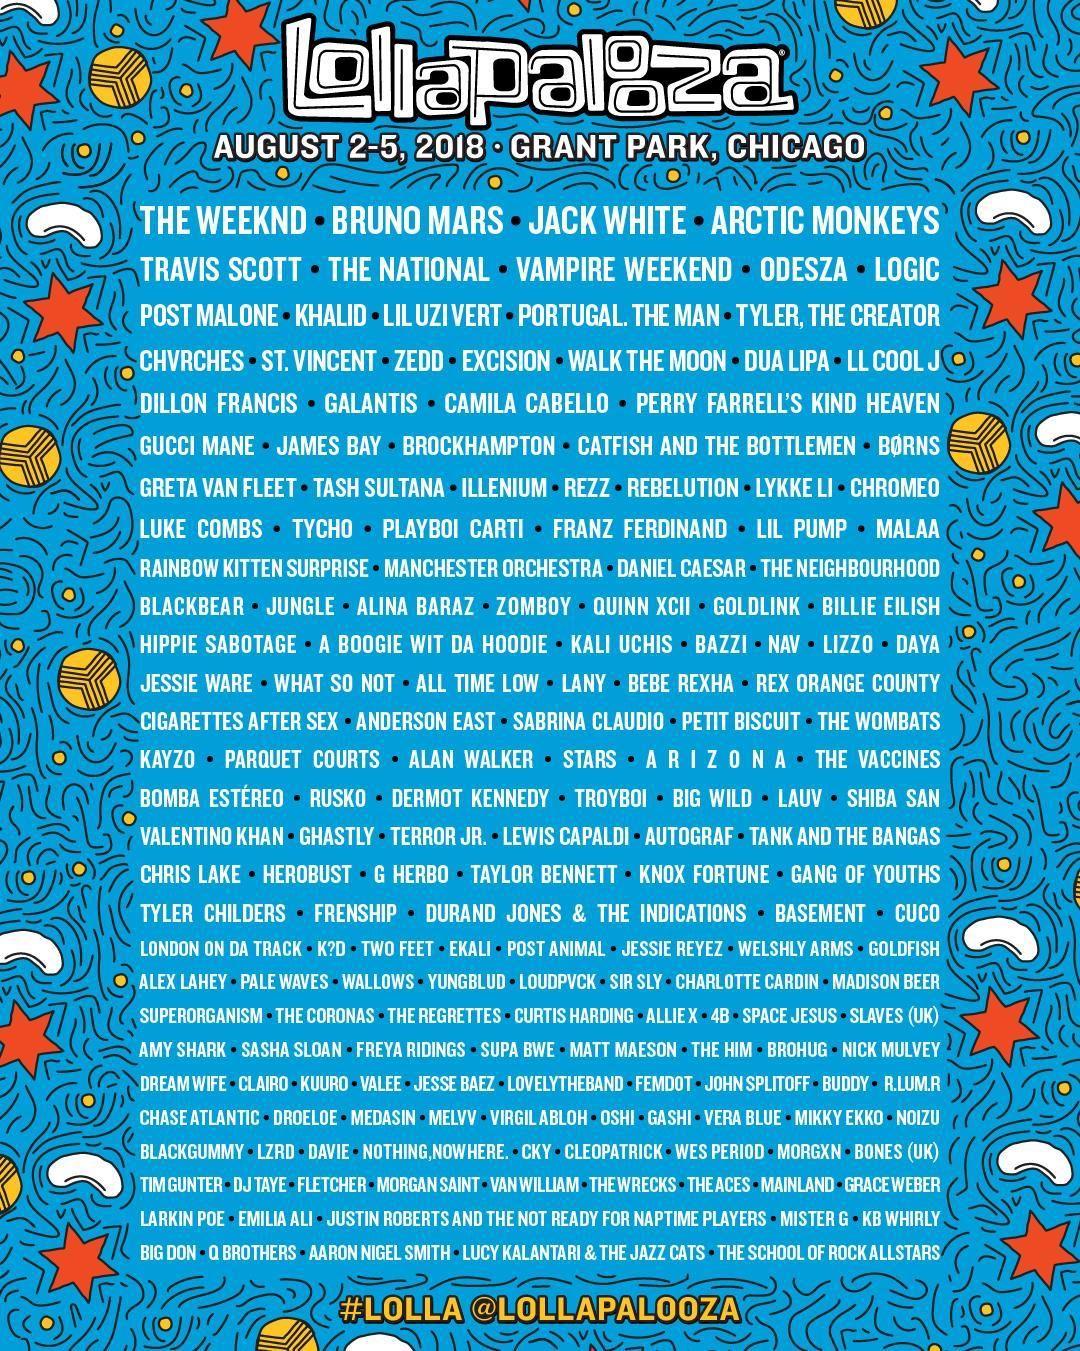 Lollapalooza's 2018 Lineup Was Just Revealed